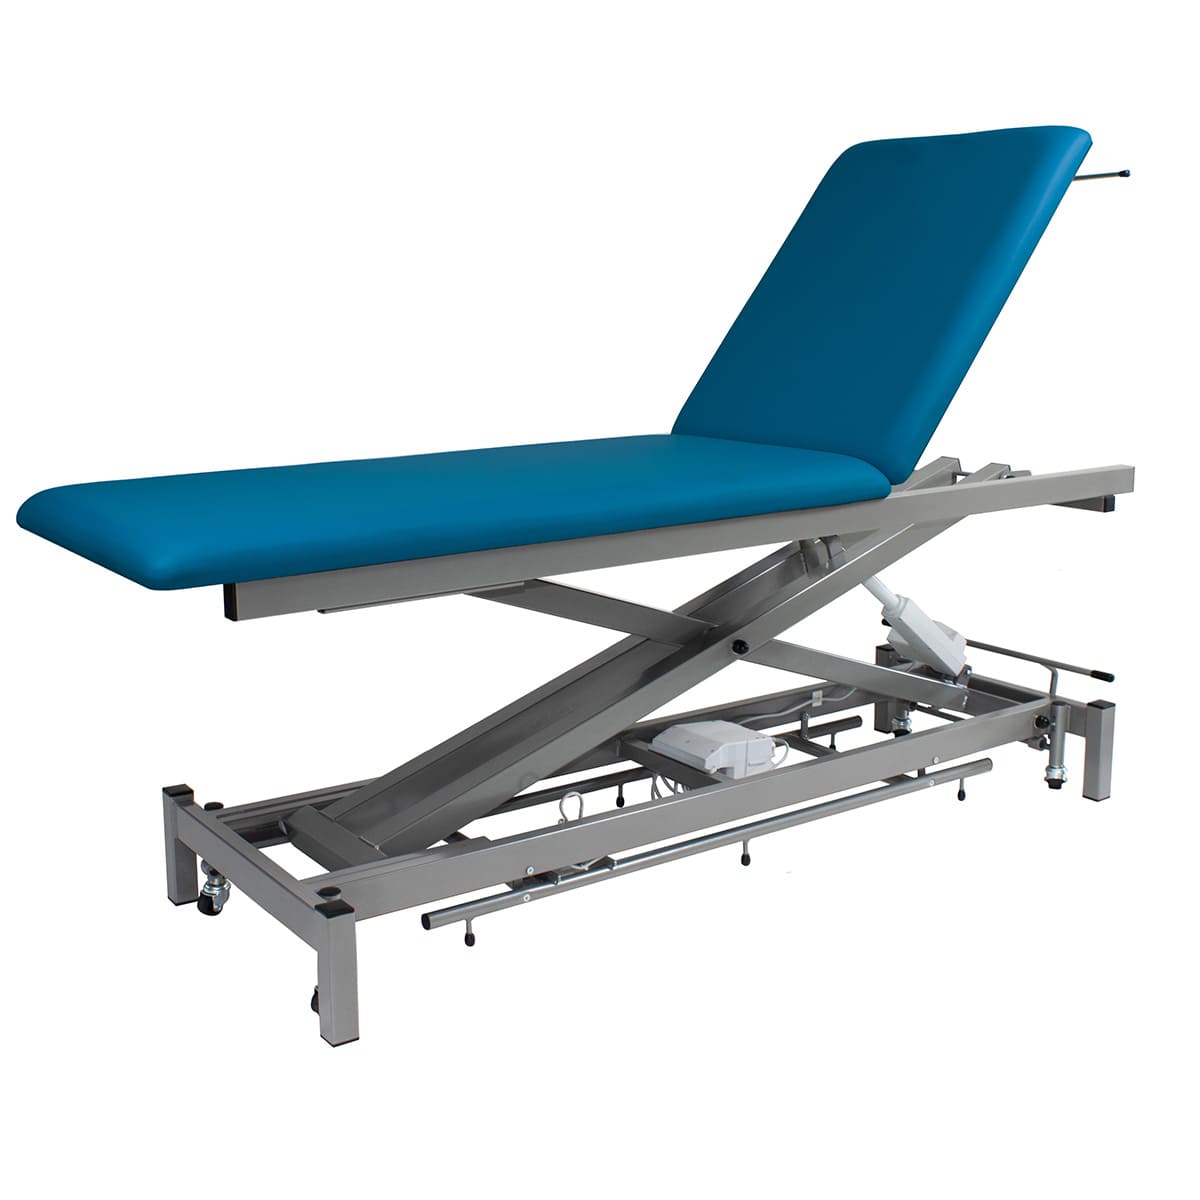 Examination couch width 60cm, hand remote